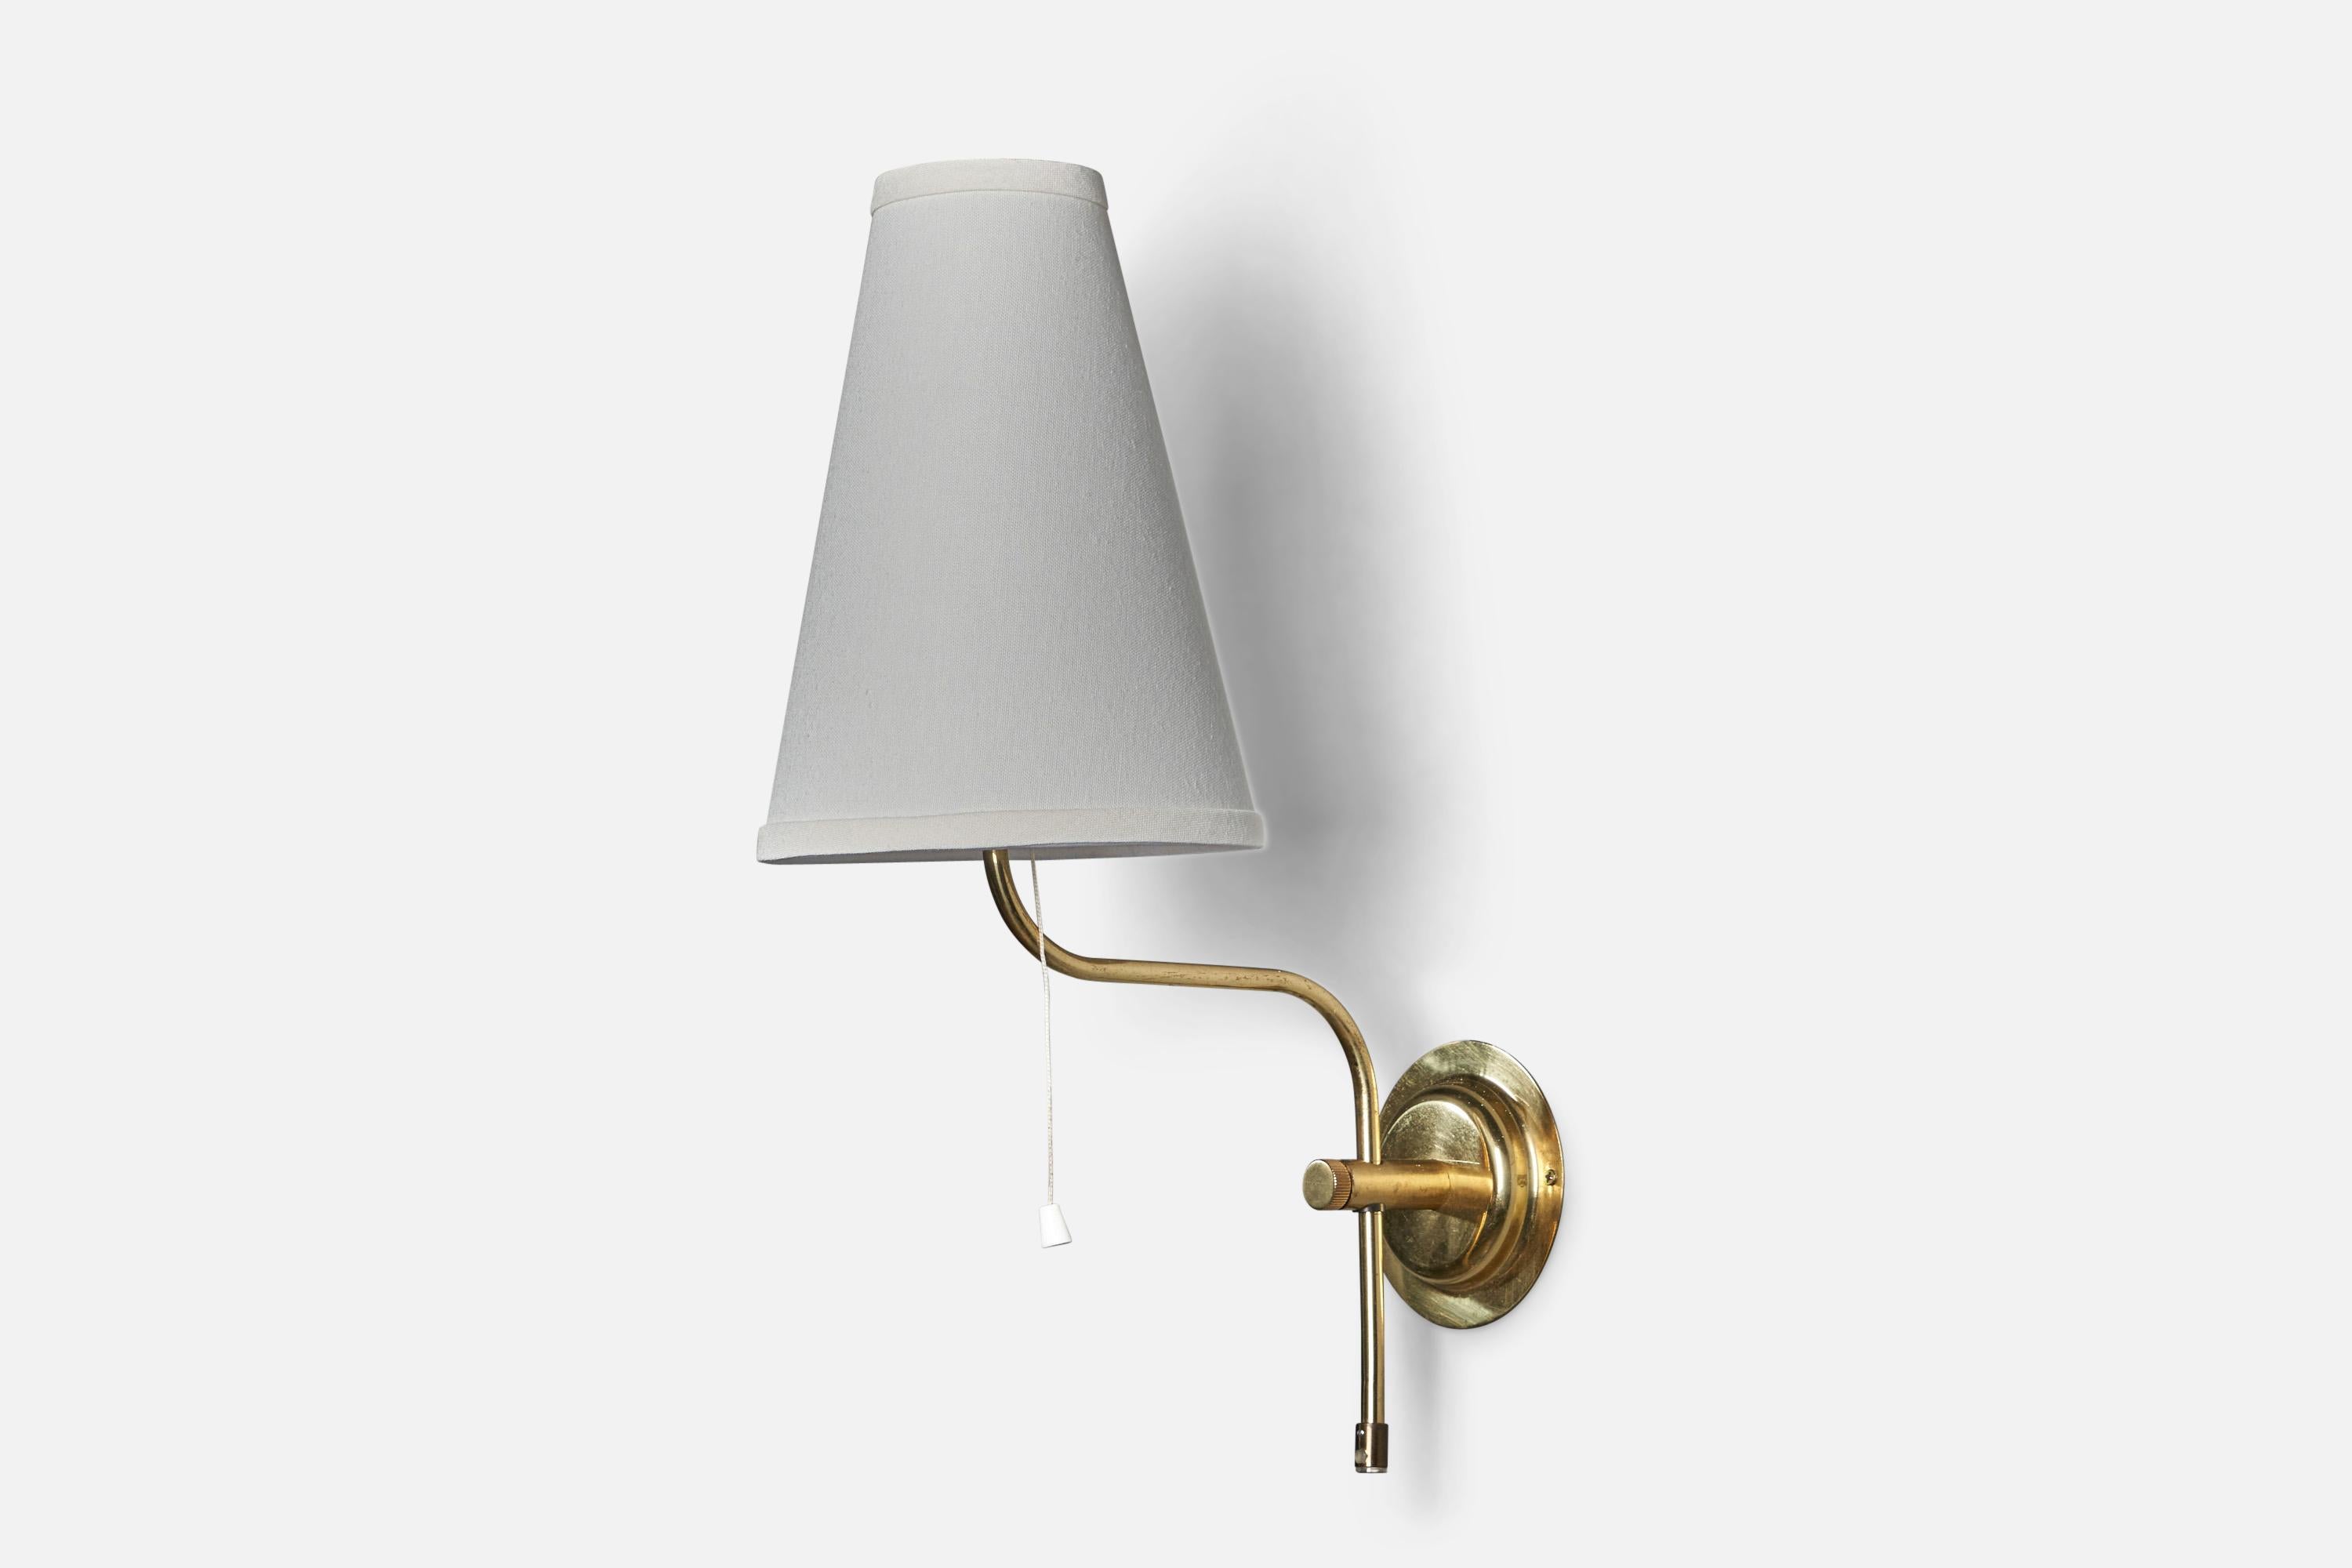 An adjustable brass and fabric wall light, designed and produced in Sweden, 1970s.

Overall Dimensions (inches): 20” H x 7.5” W x 13” D
Bulb Specifications: E-26 Bulb
Number of Sockets: 1